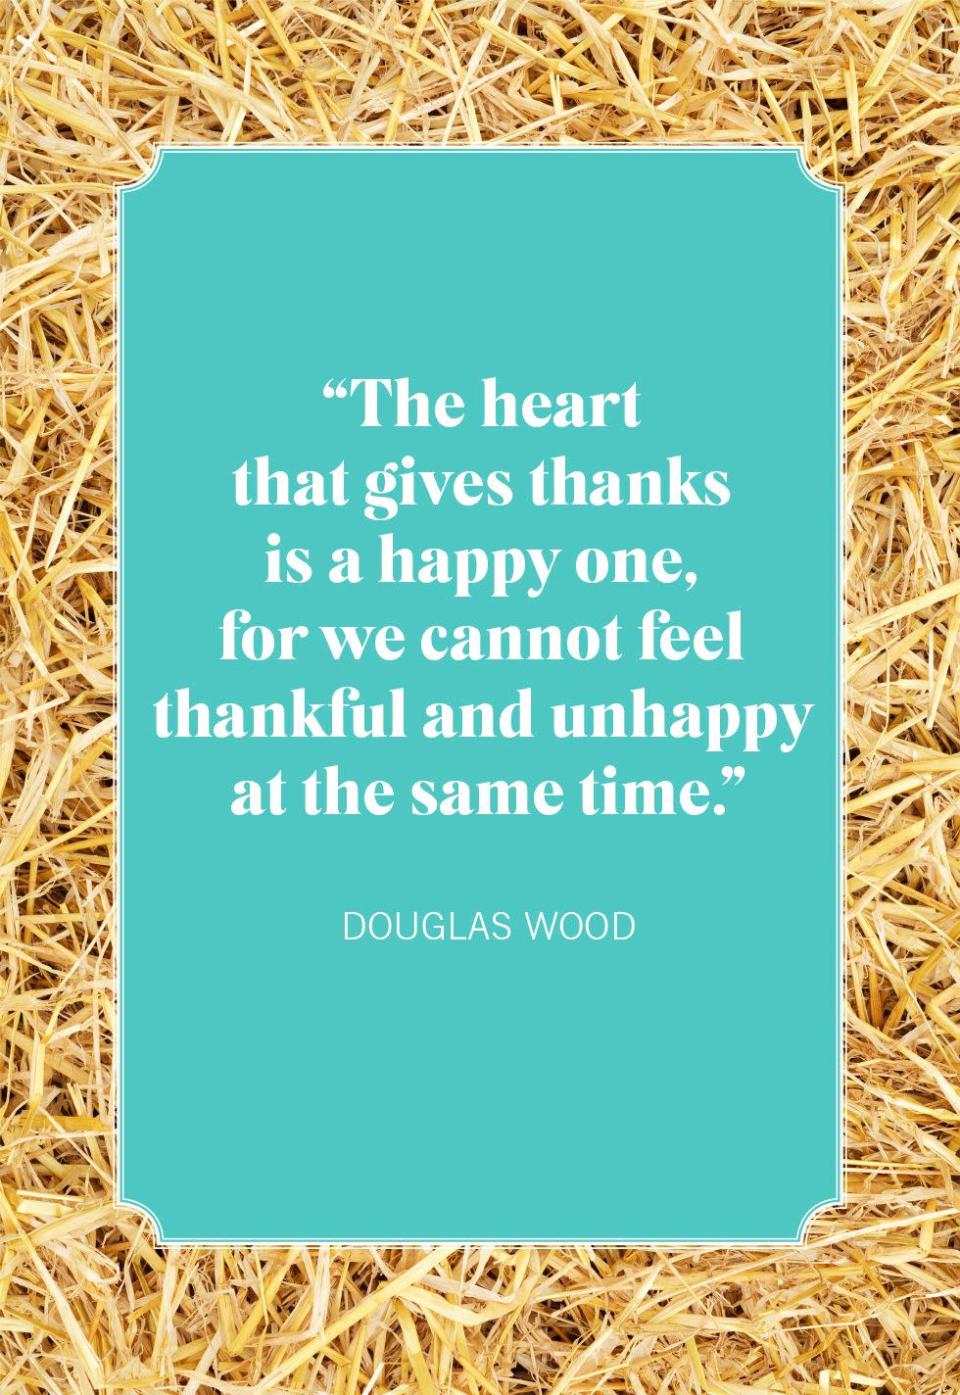 <p>"The heart that gives thanks is a happy one, for we cannot feel thankful and unhappy at the same time."</p>